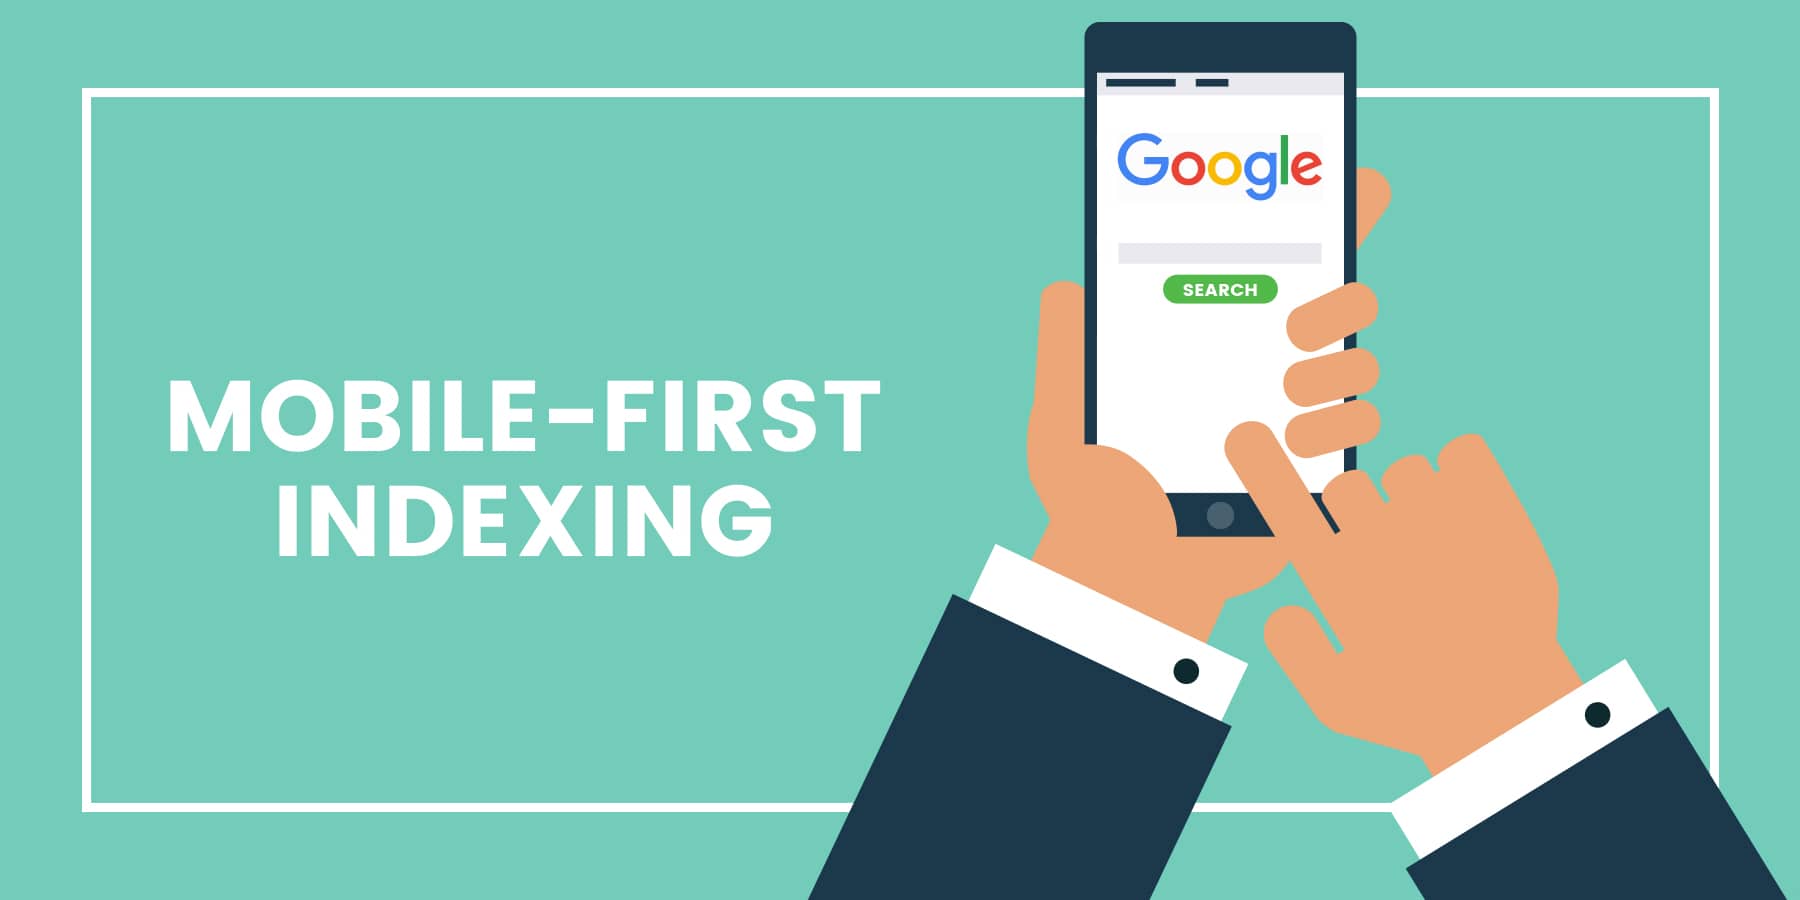 An image representing Mobile First Indexing